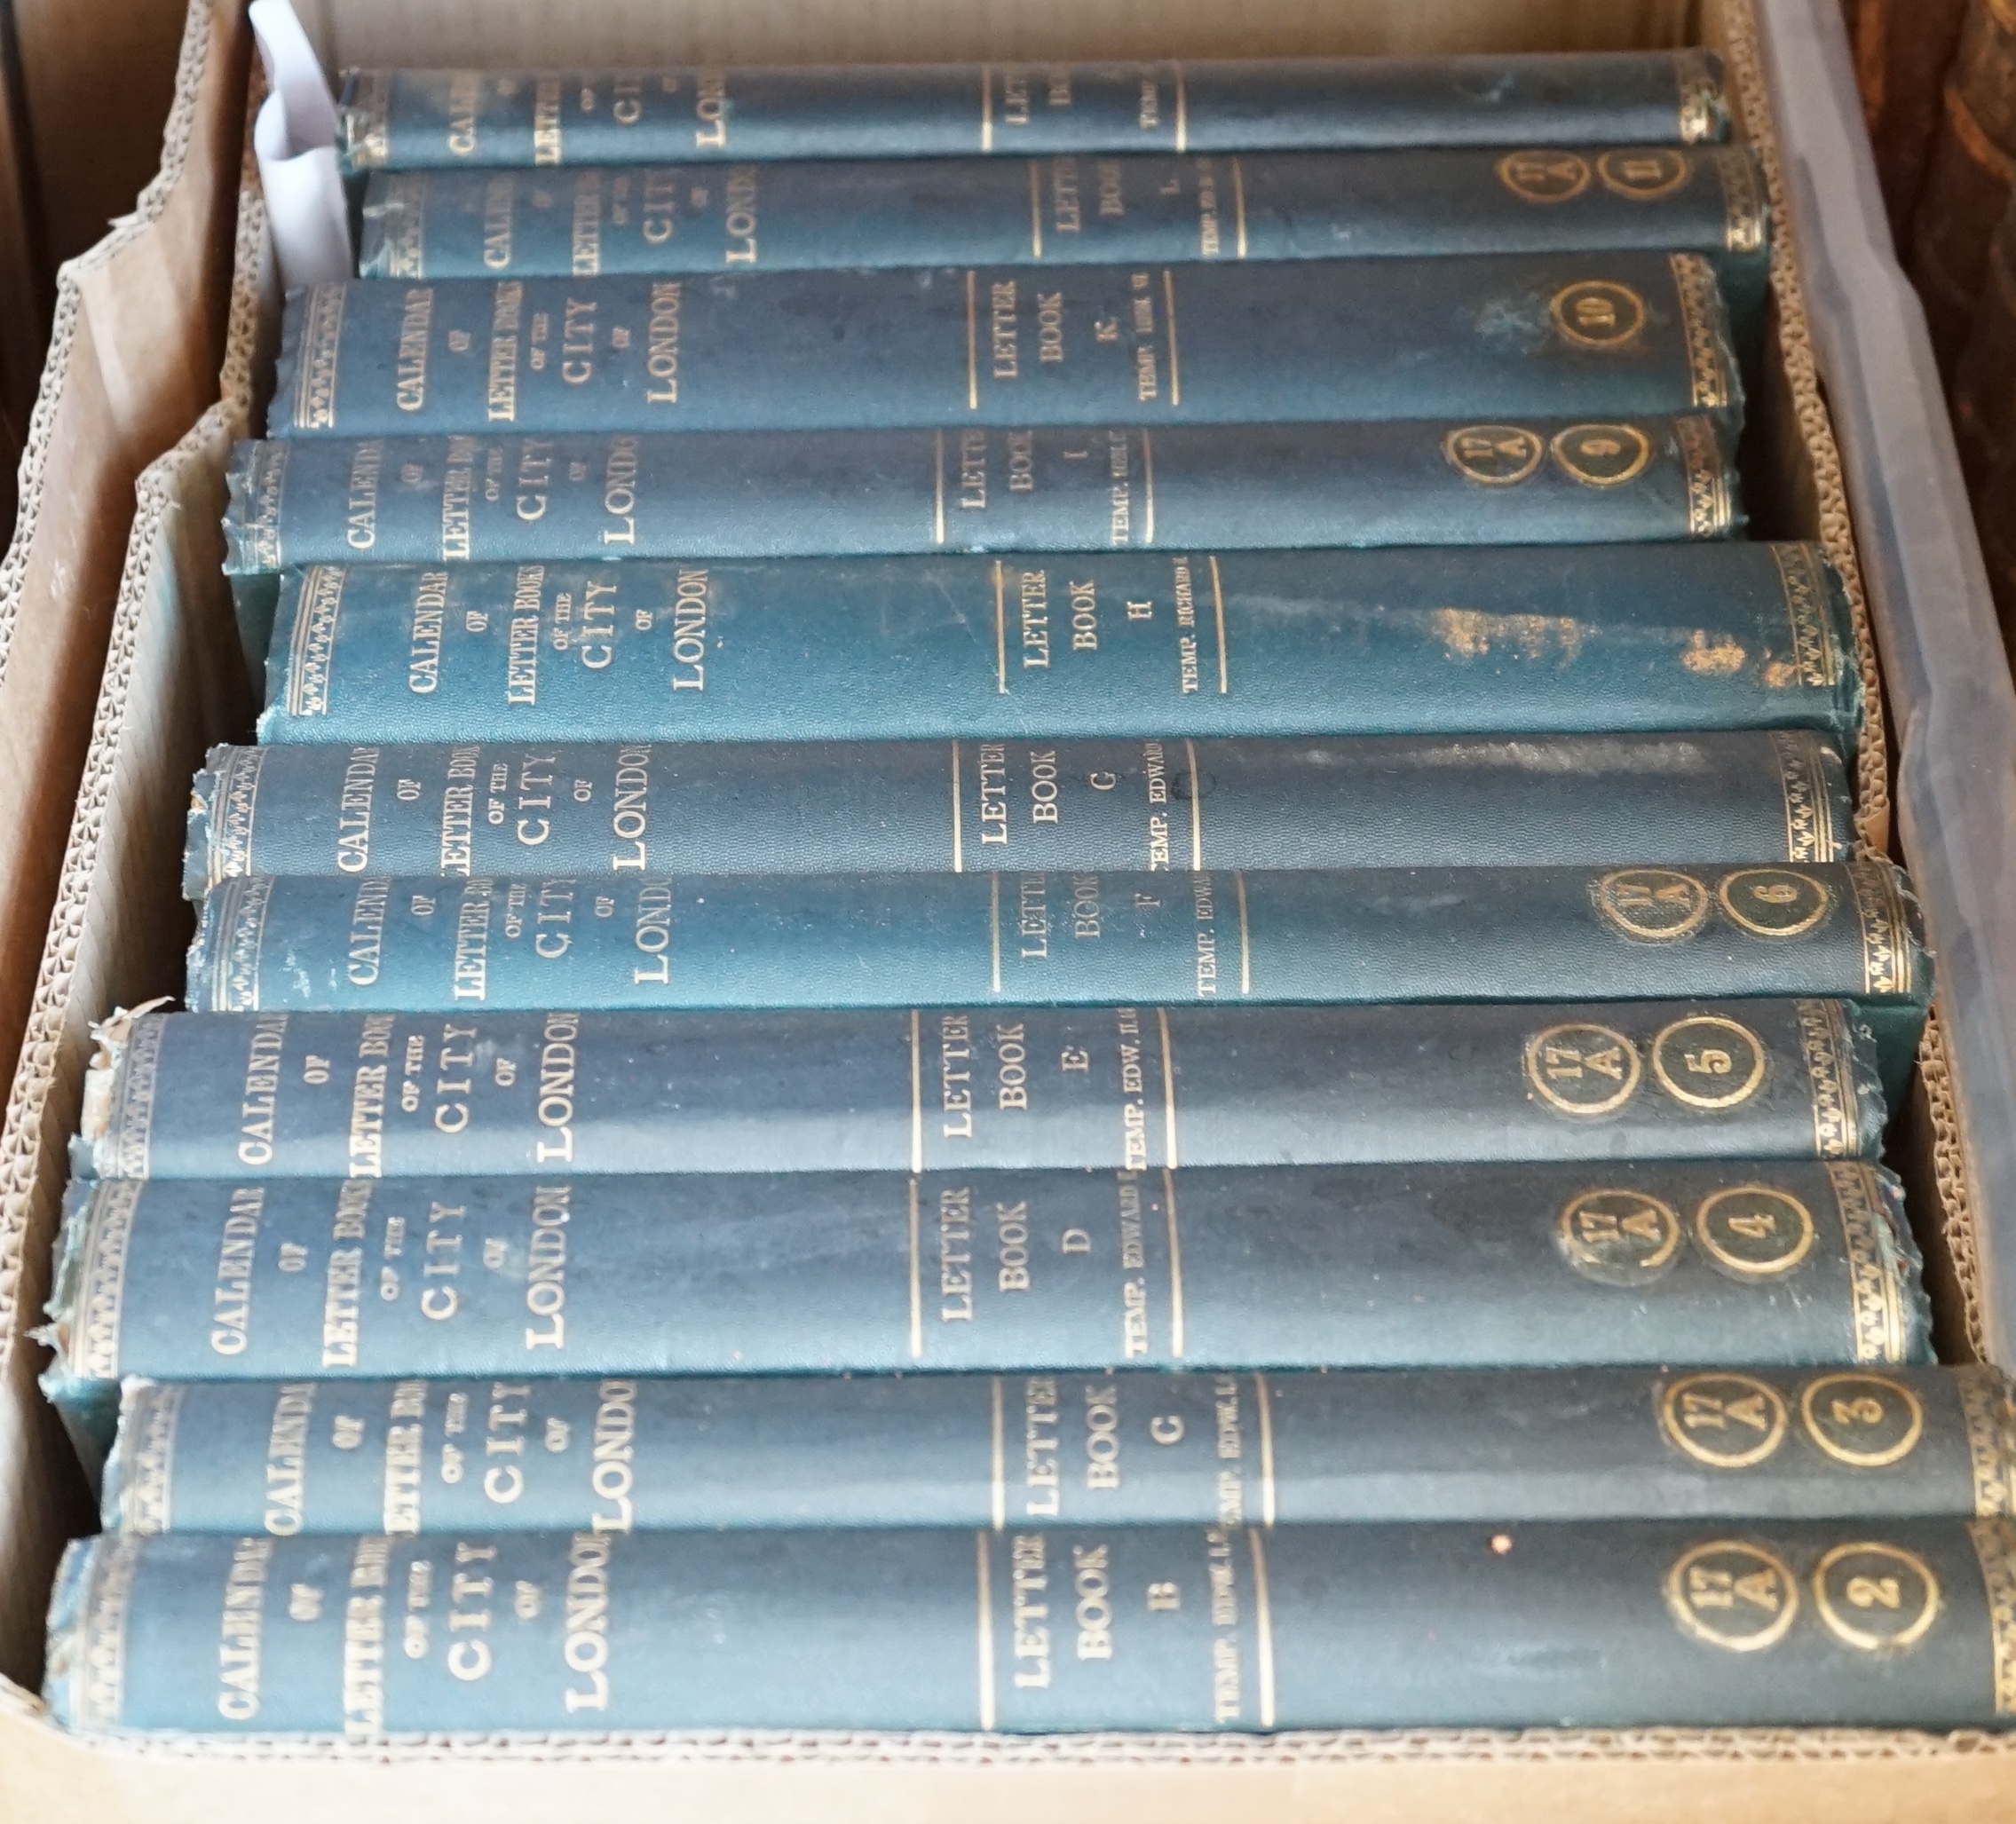 Sharpe, R.R (editor) - Calendar of Letter-Books of the City of London at the Guildhall, complete set of 11 Vols. (all published), A to L (no J), original blindstamped green cloth, London, 1909.